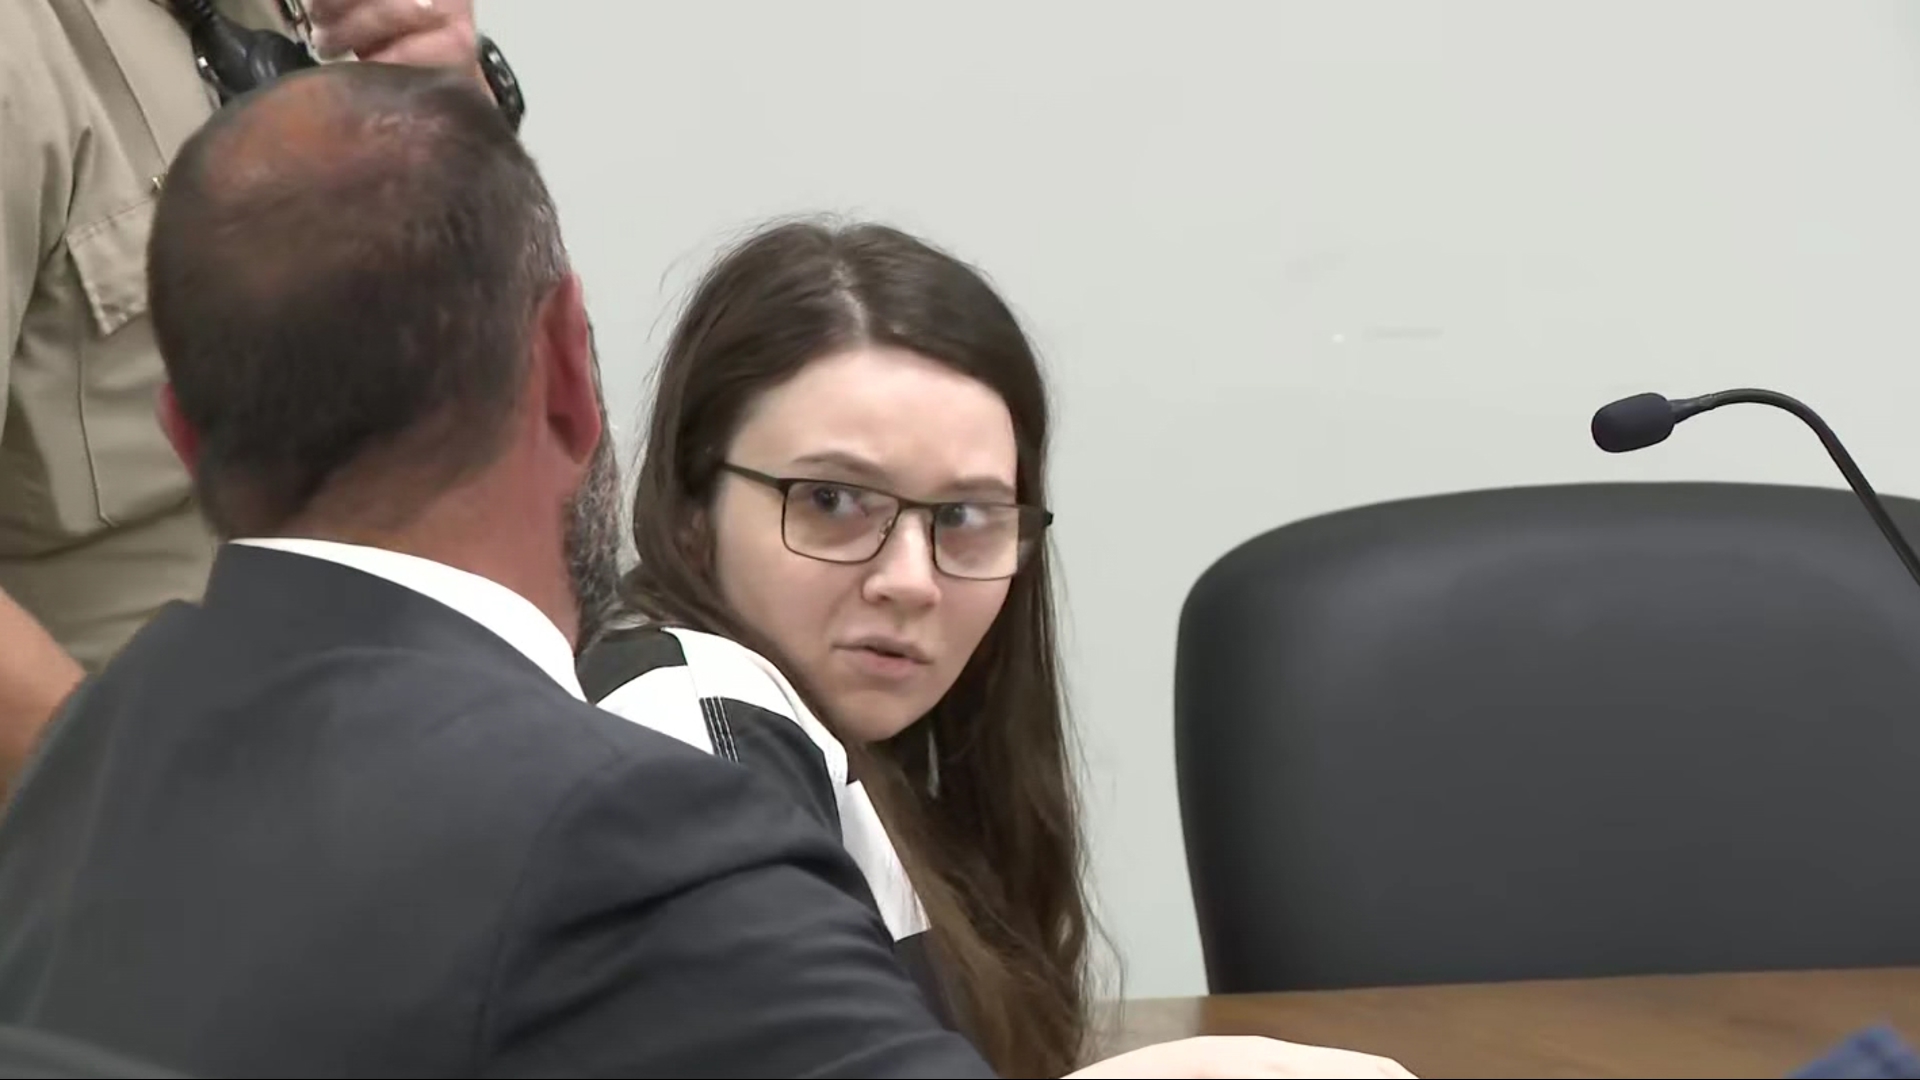 The judge will decide in August whether the mother will face trial in Sullivan County.